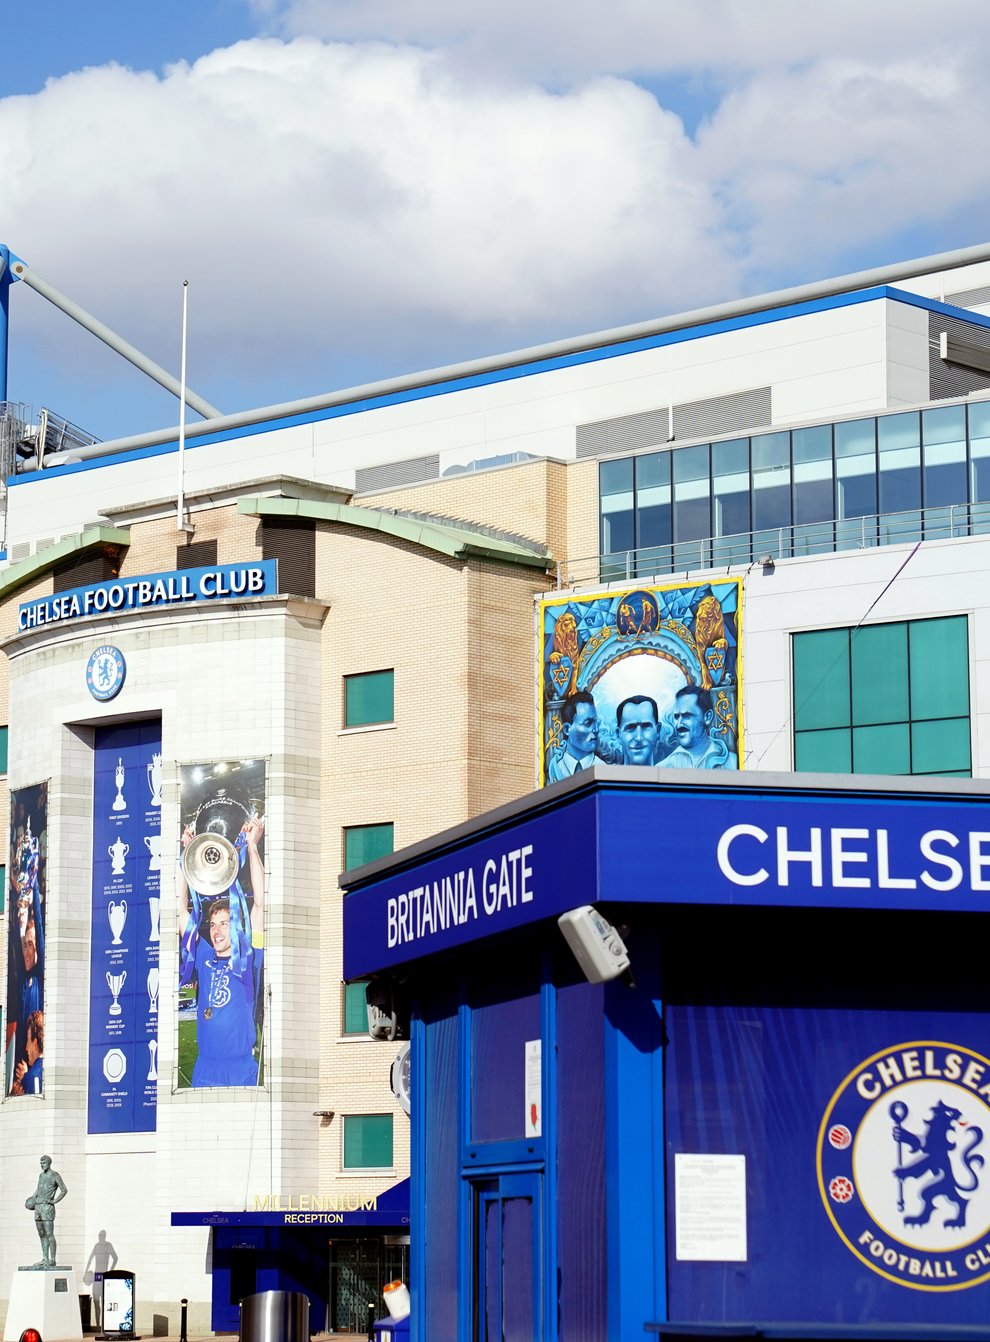 Stamford Bridge, pictured, will soon play host to new Chelsea owners (Stefan Roussea/PA)